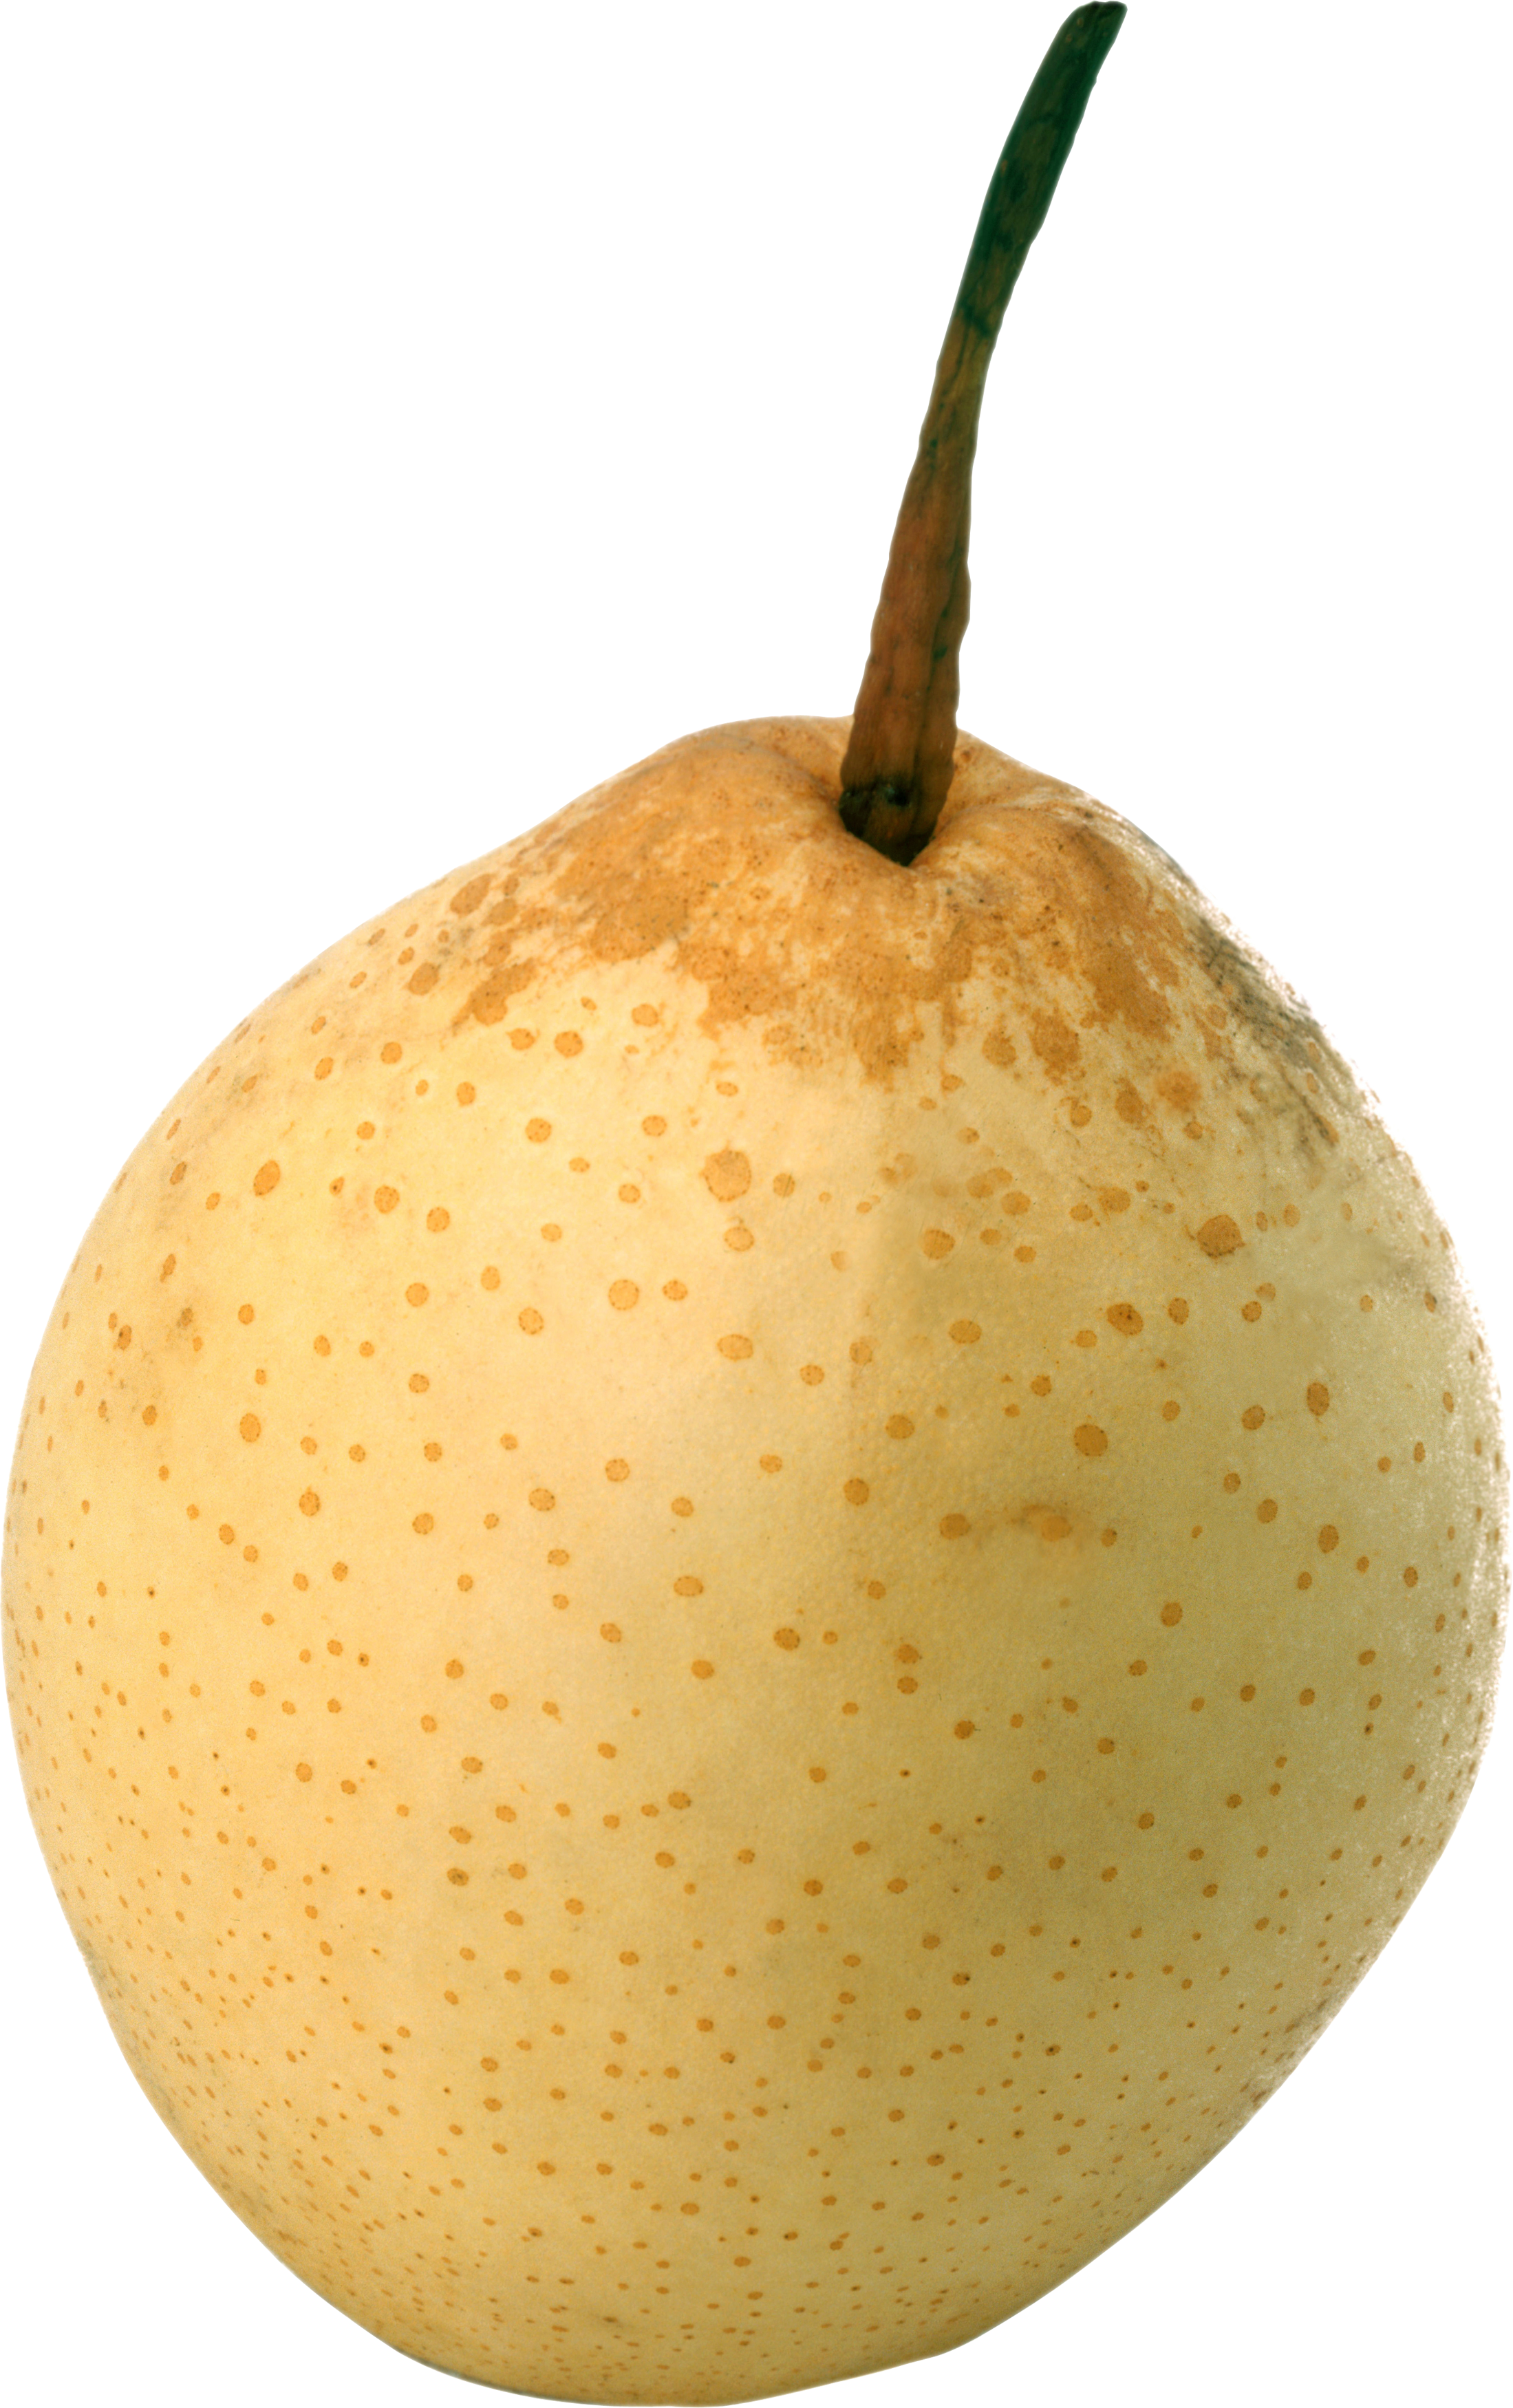 Asian Pear Transparent Background